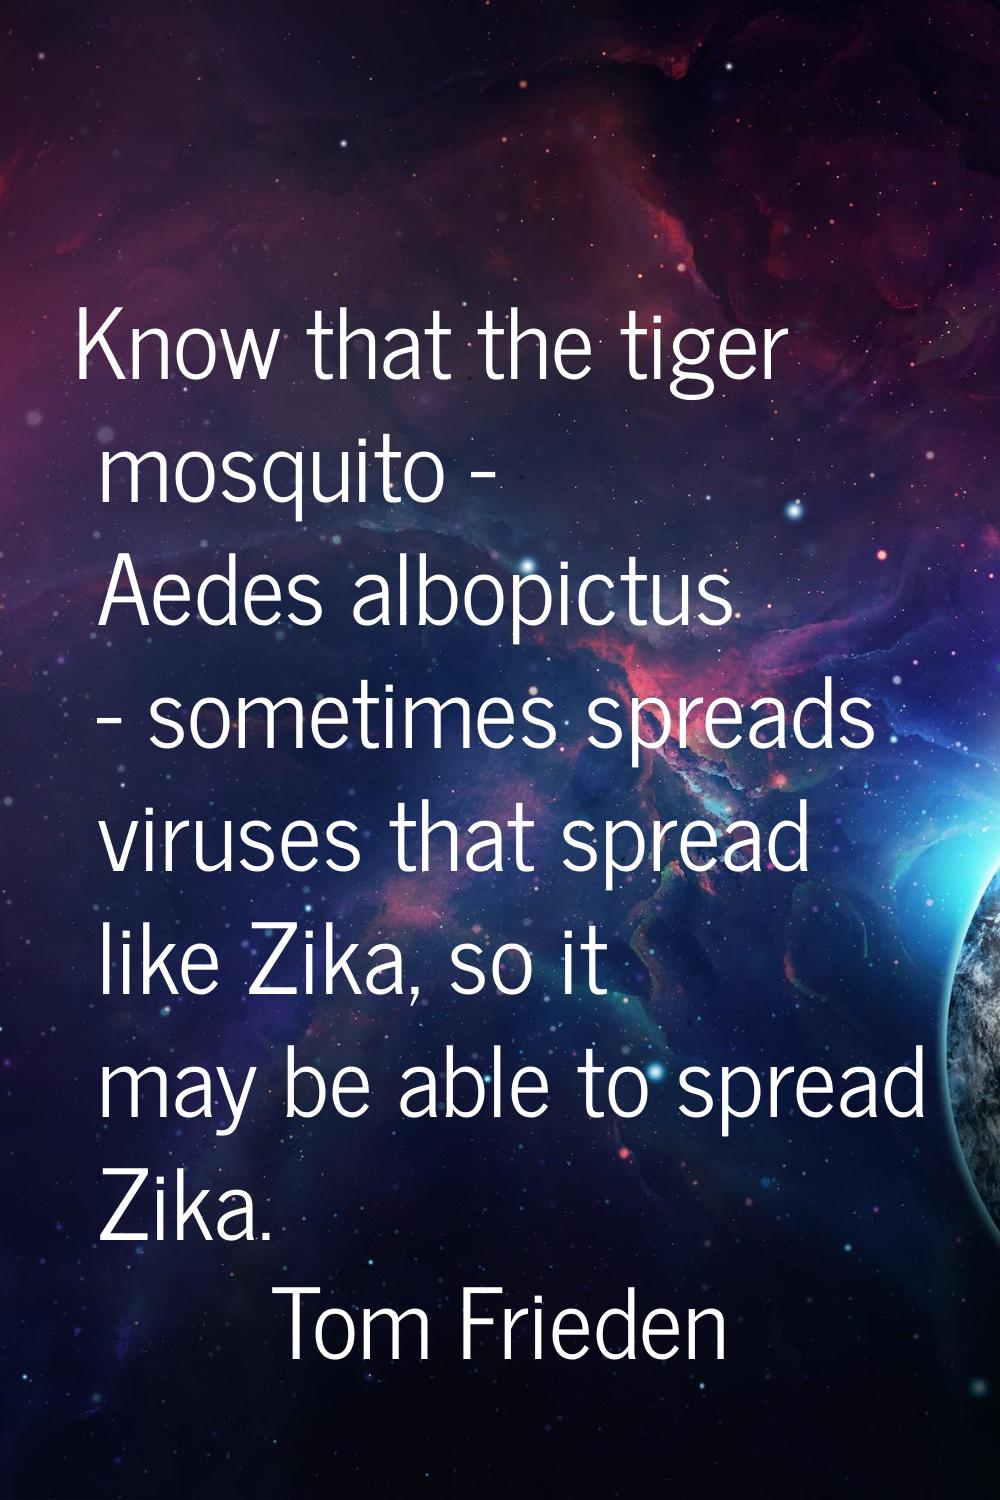 Know that the tiger mosquito - Aedes albopictus - sometimes spreads viruses that spread like Zika, 